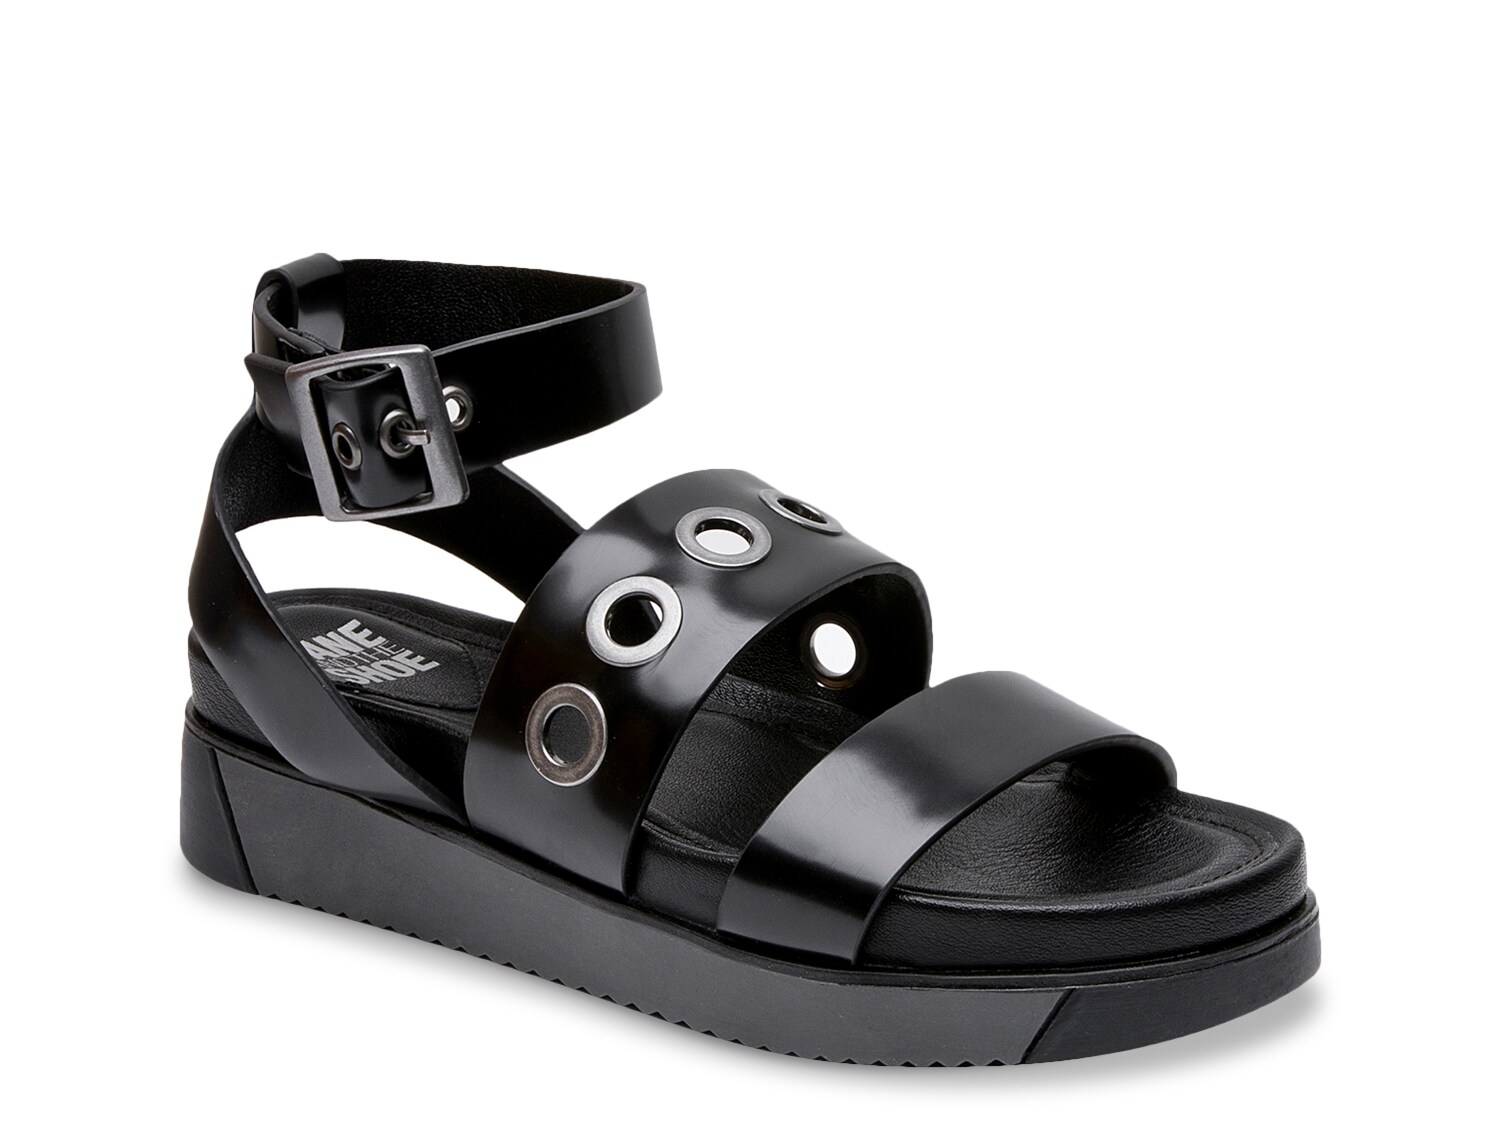 Jane and the Shoe Poppy Sandal - Free Shipping | DSW